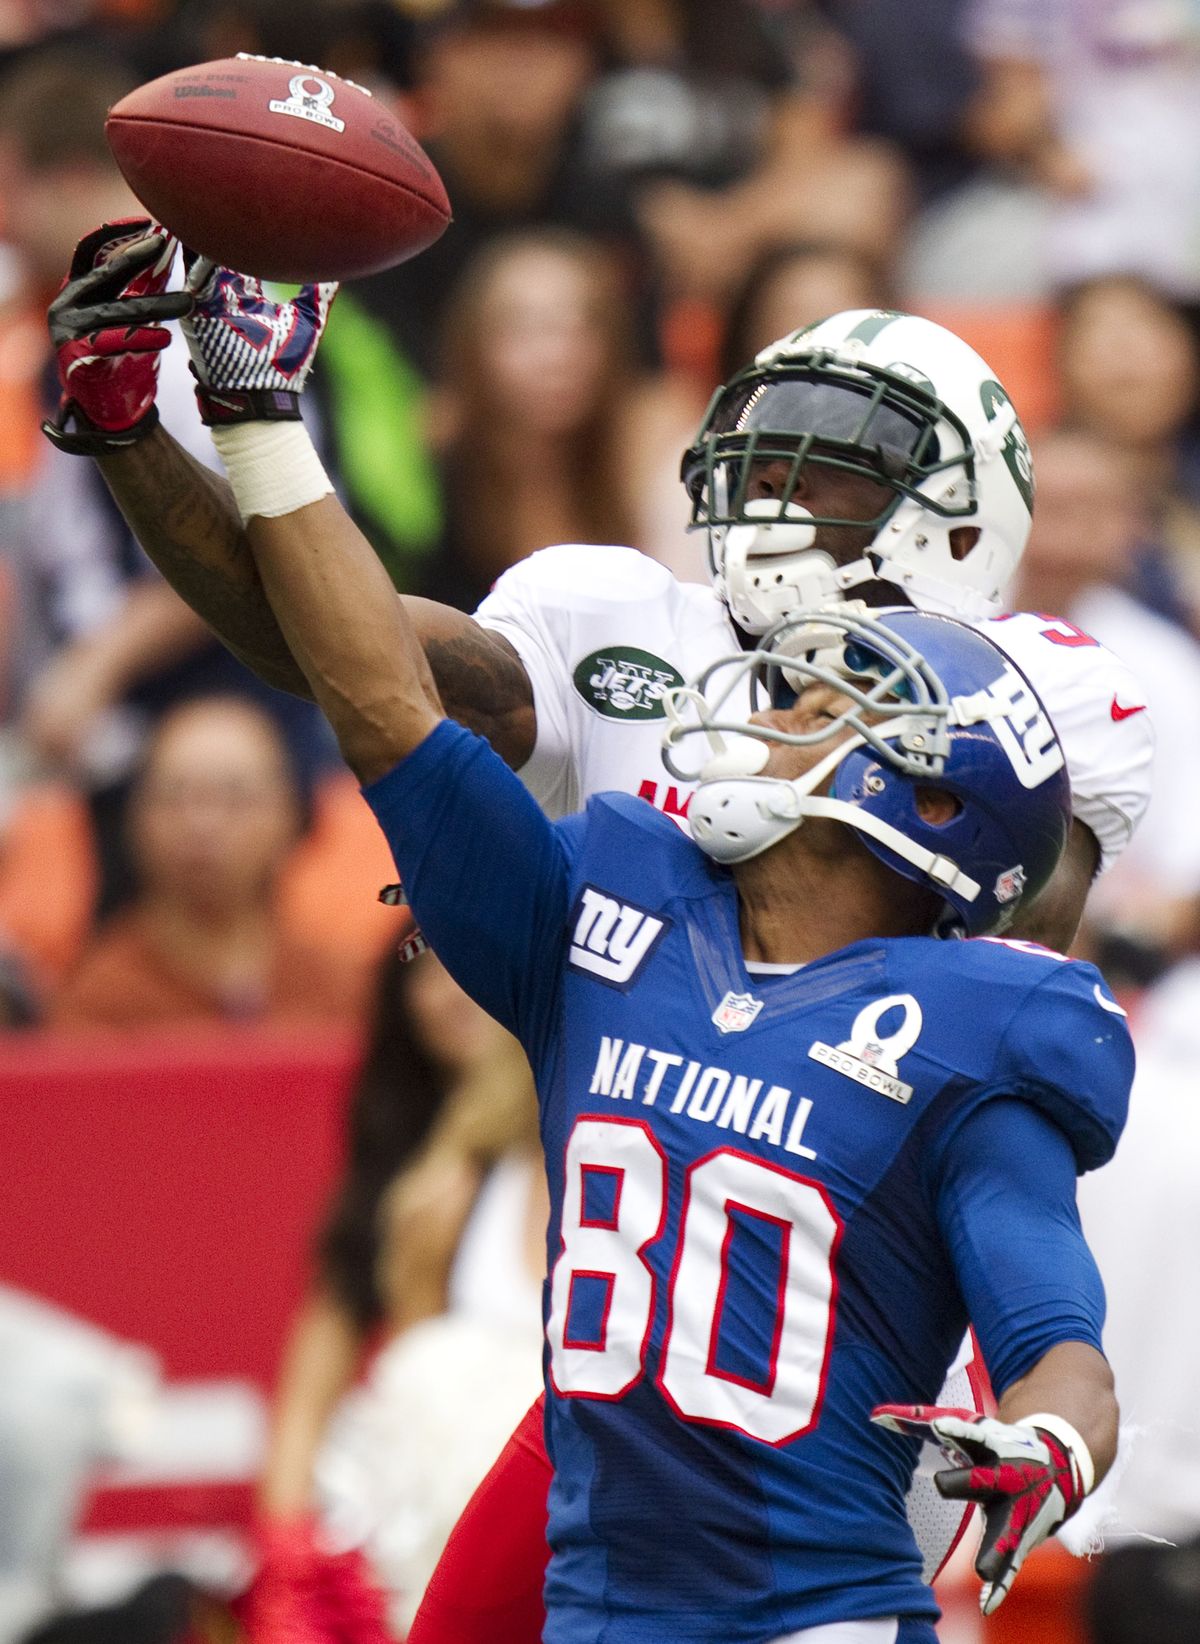 Antonio Cromartie of the AFC breaks up a pass intended for Victor Cruz (80) of the NFC. (Associated Press)